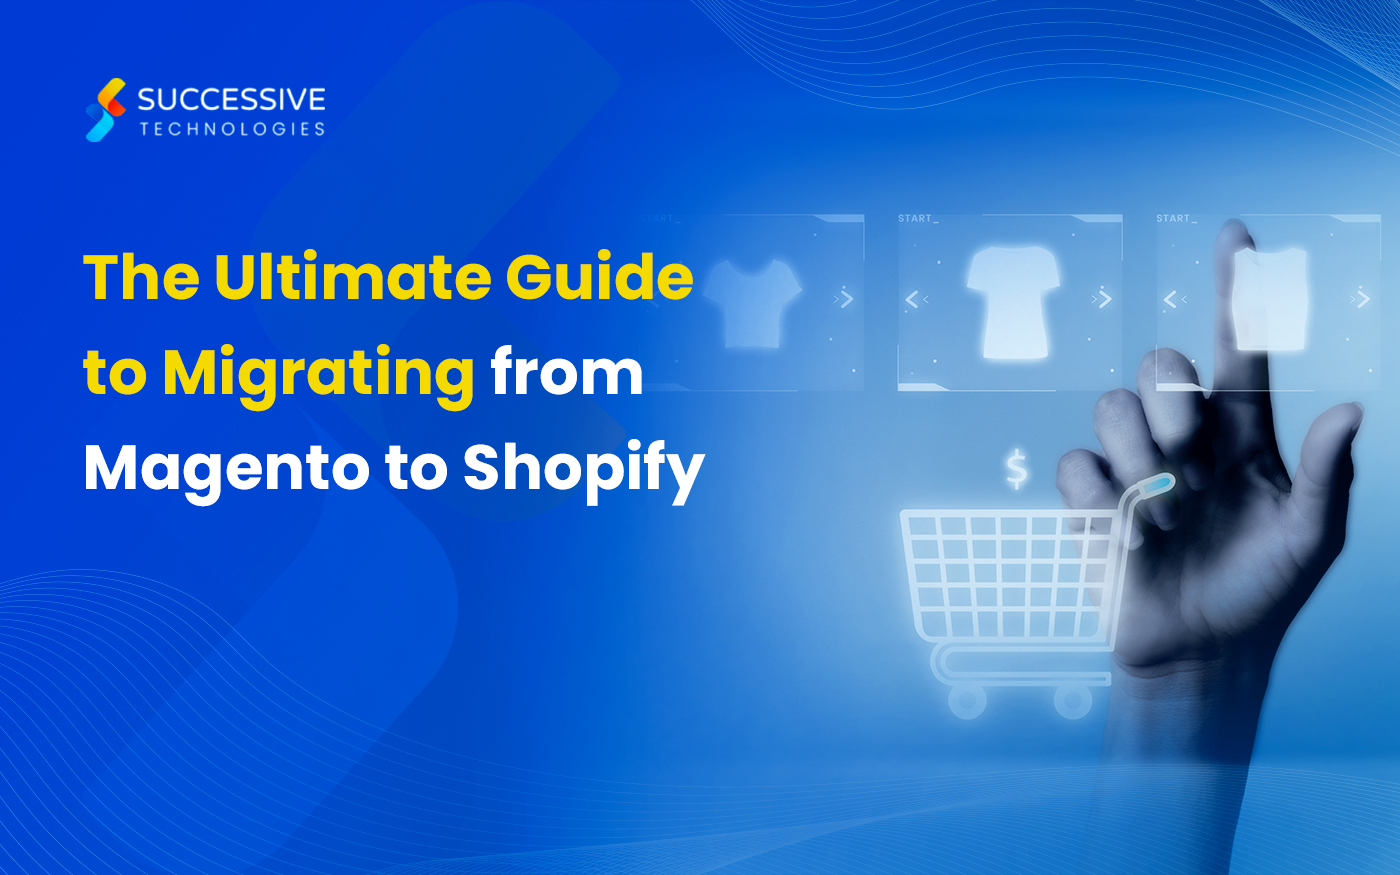 The Ultimate Guide to Migrating from Magento to Shopify